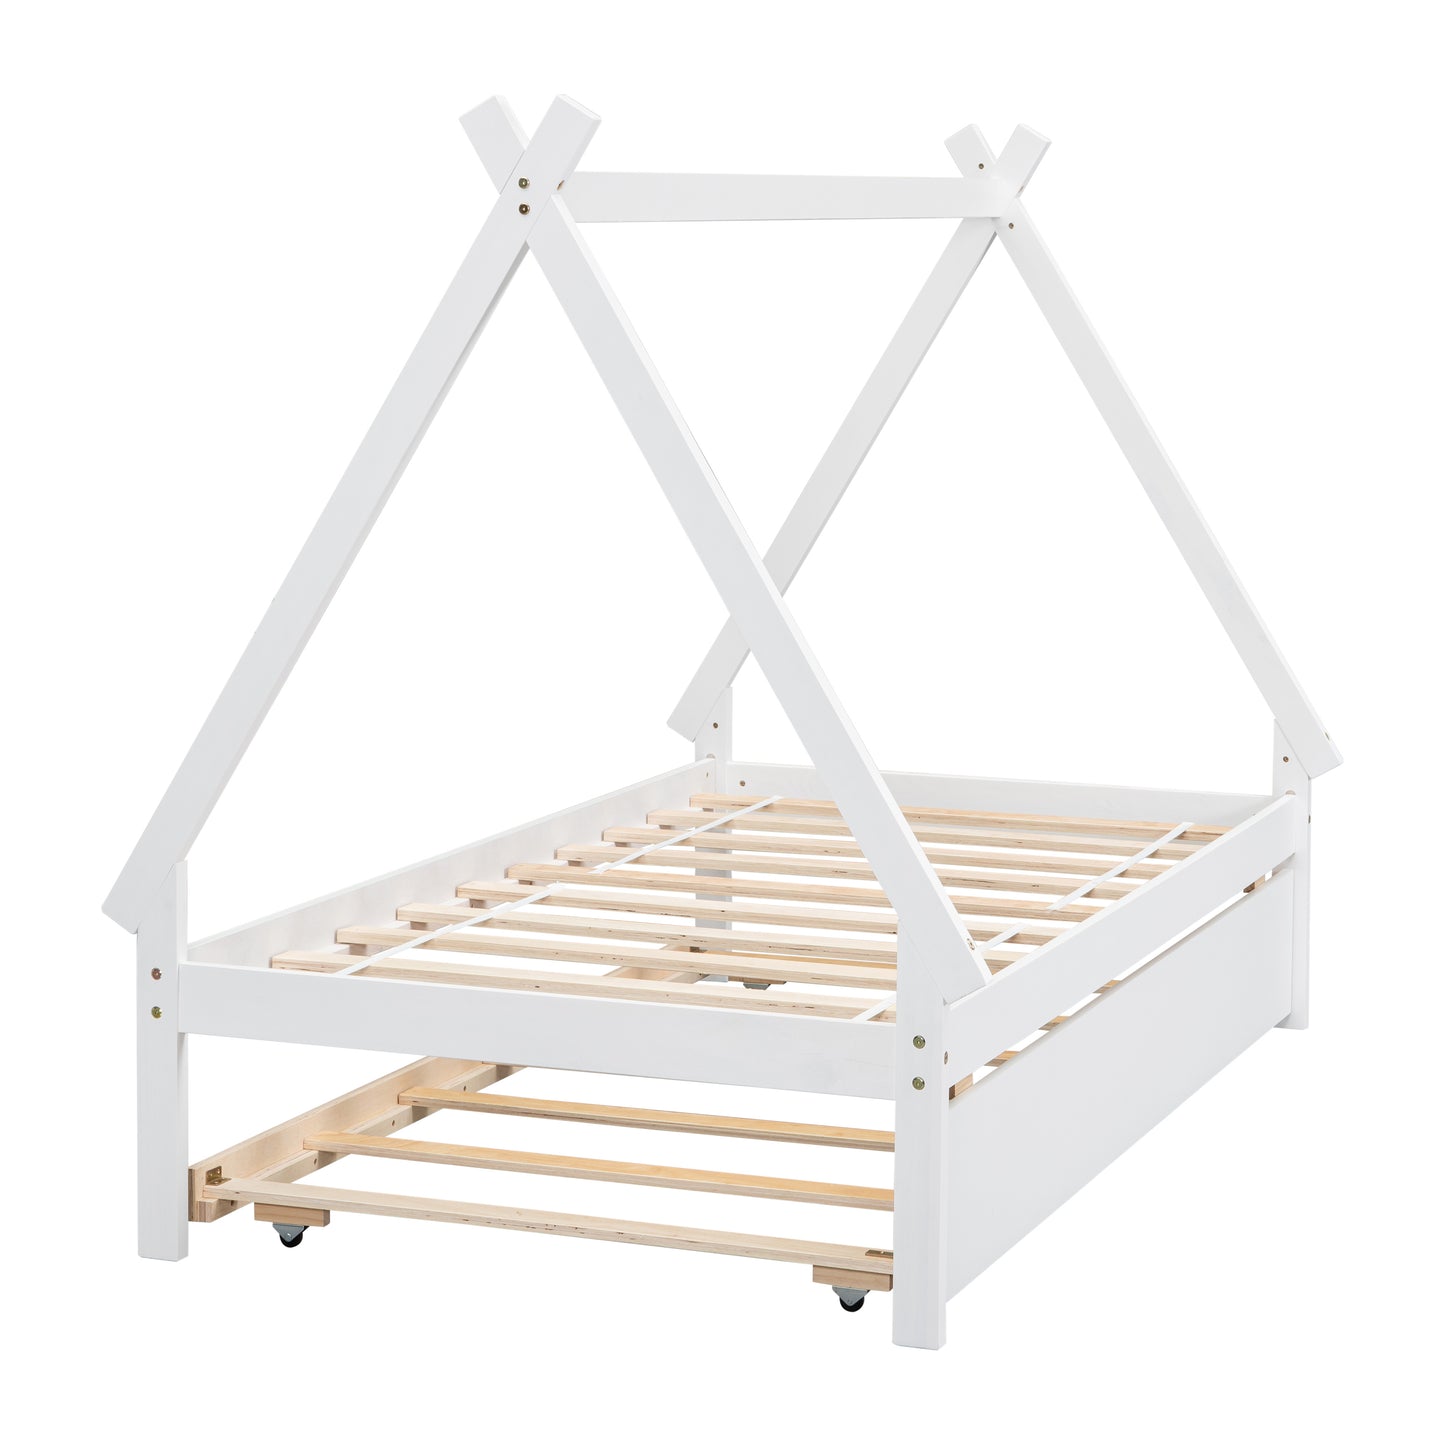 Twin size Tent Floor Platform Bed, Teepee Bed, with Trundle,White